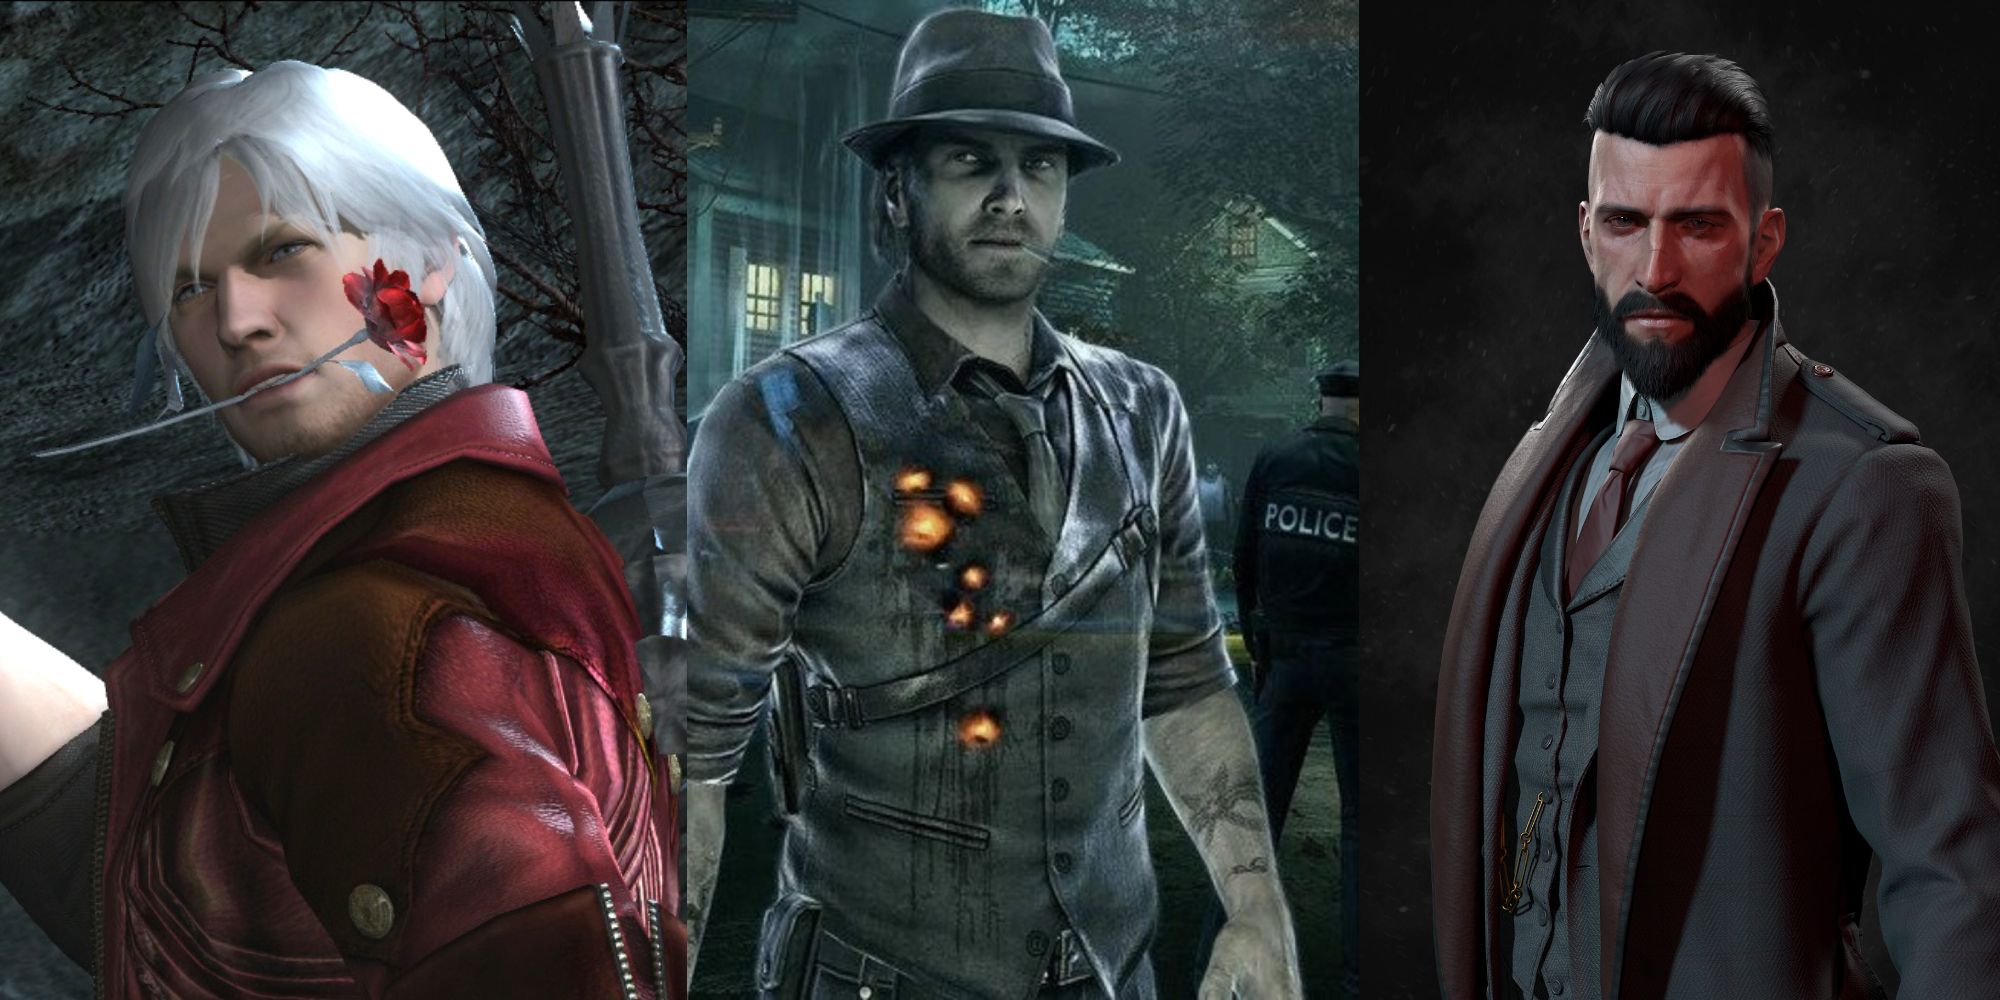 The playable characters Dante from Devil May Cry Ronan from Murdered: Soul Suspect and Johnathan from Vampyr